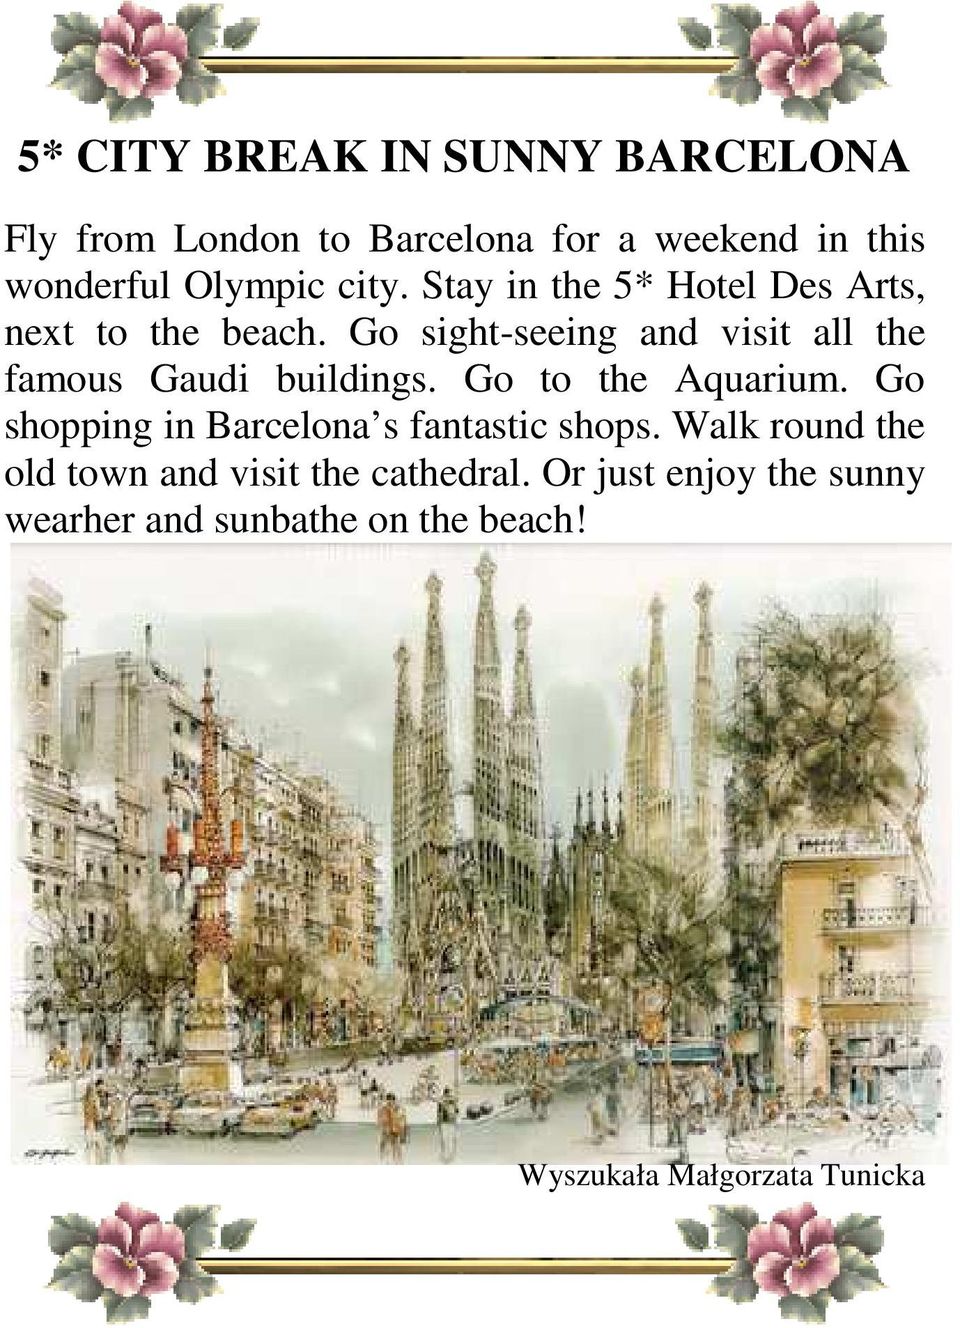 Go sight-seeing and visit all the famous Gaudi buildings. Go to the Aquarium.